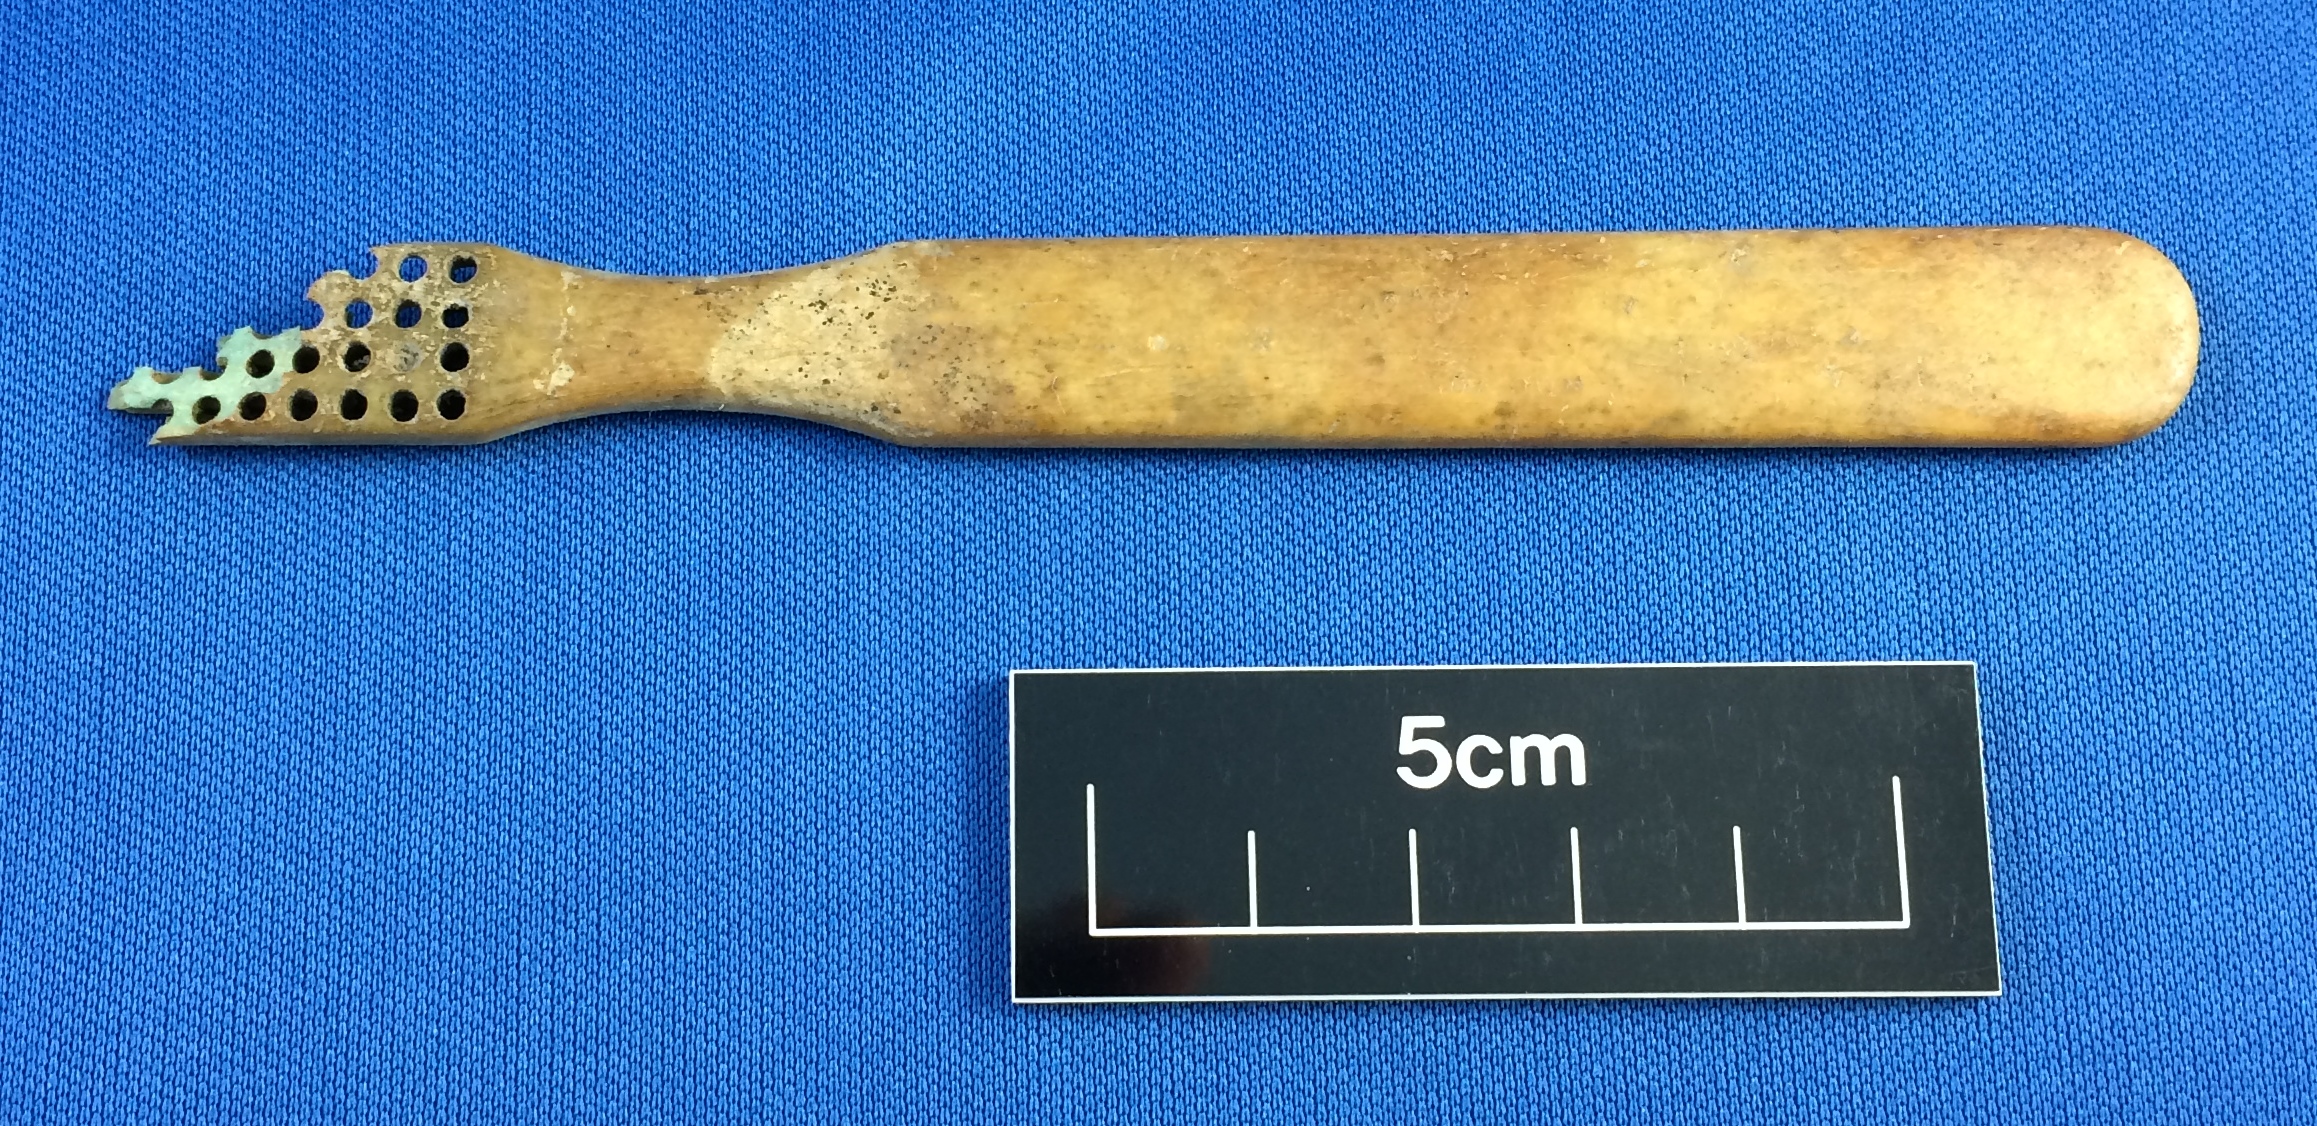 Bone toothbrush from the Cottage Hospital